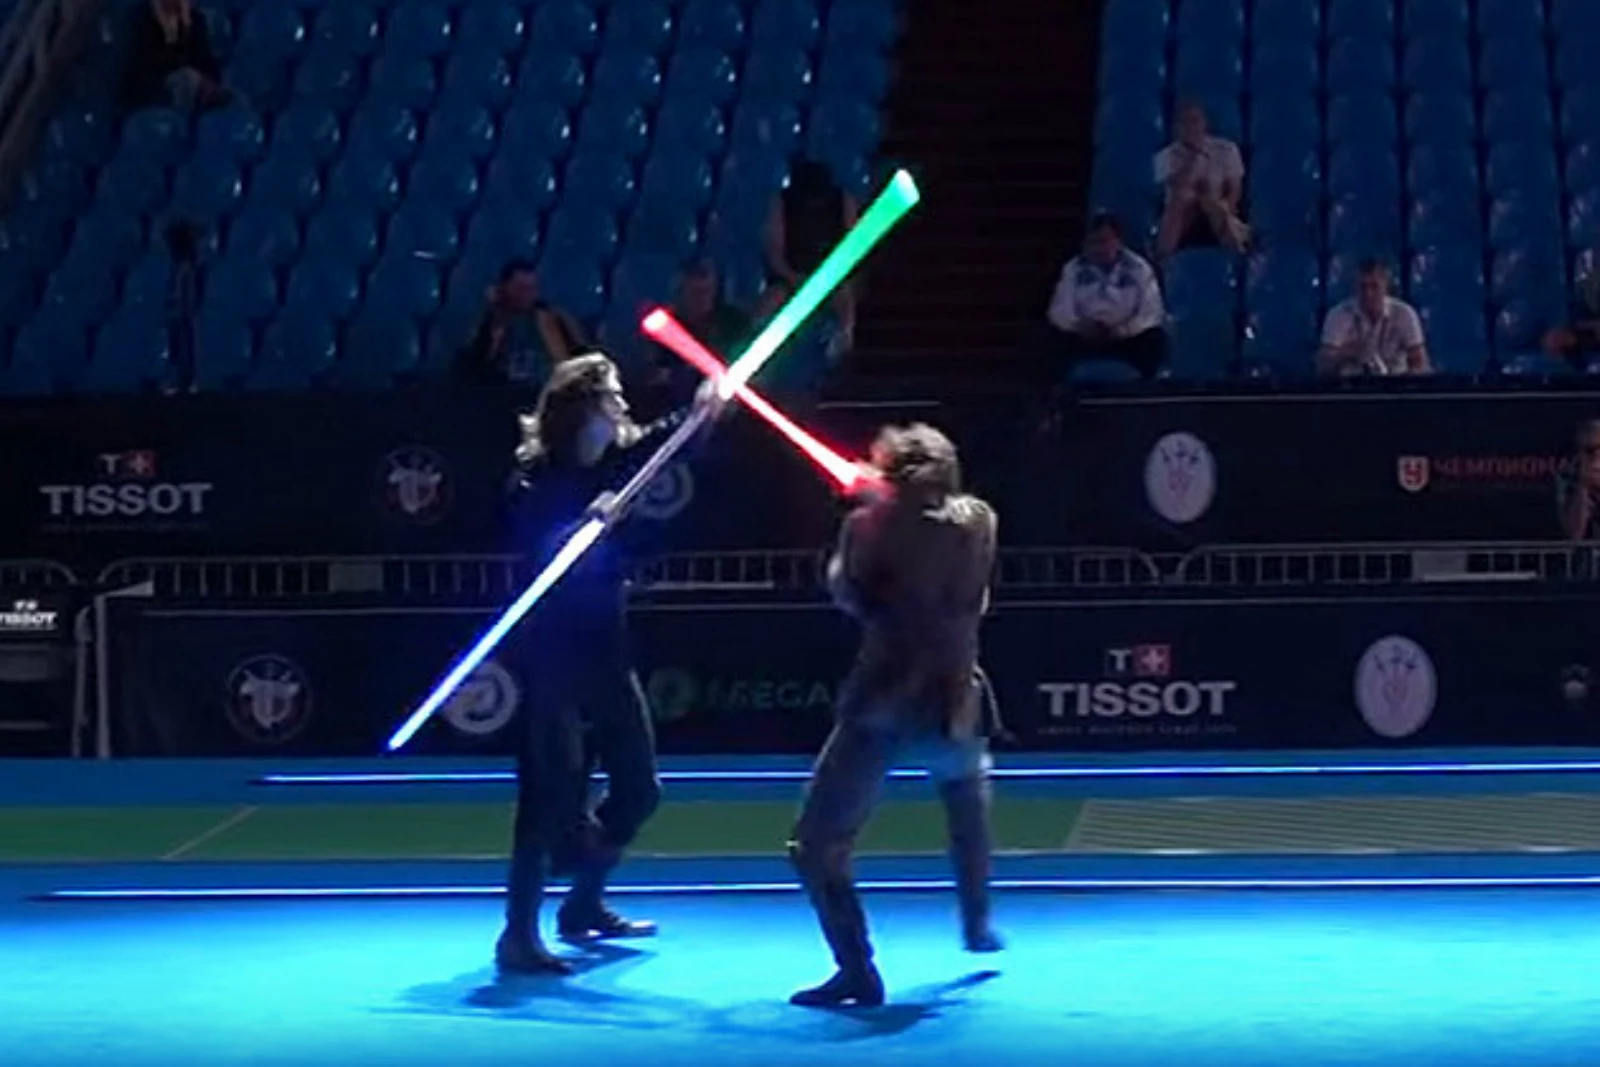 Lightsaber Dueling Is Now A Legitimate 